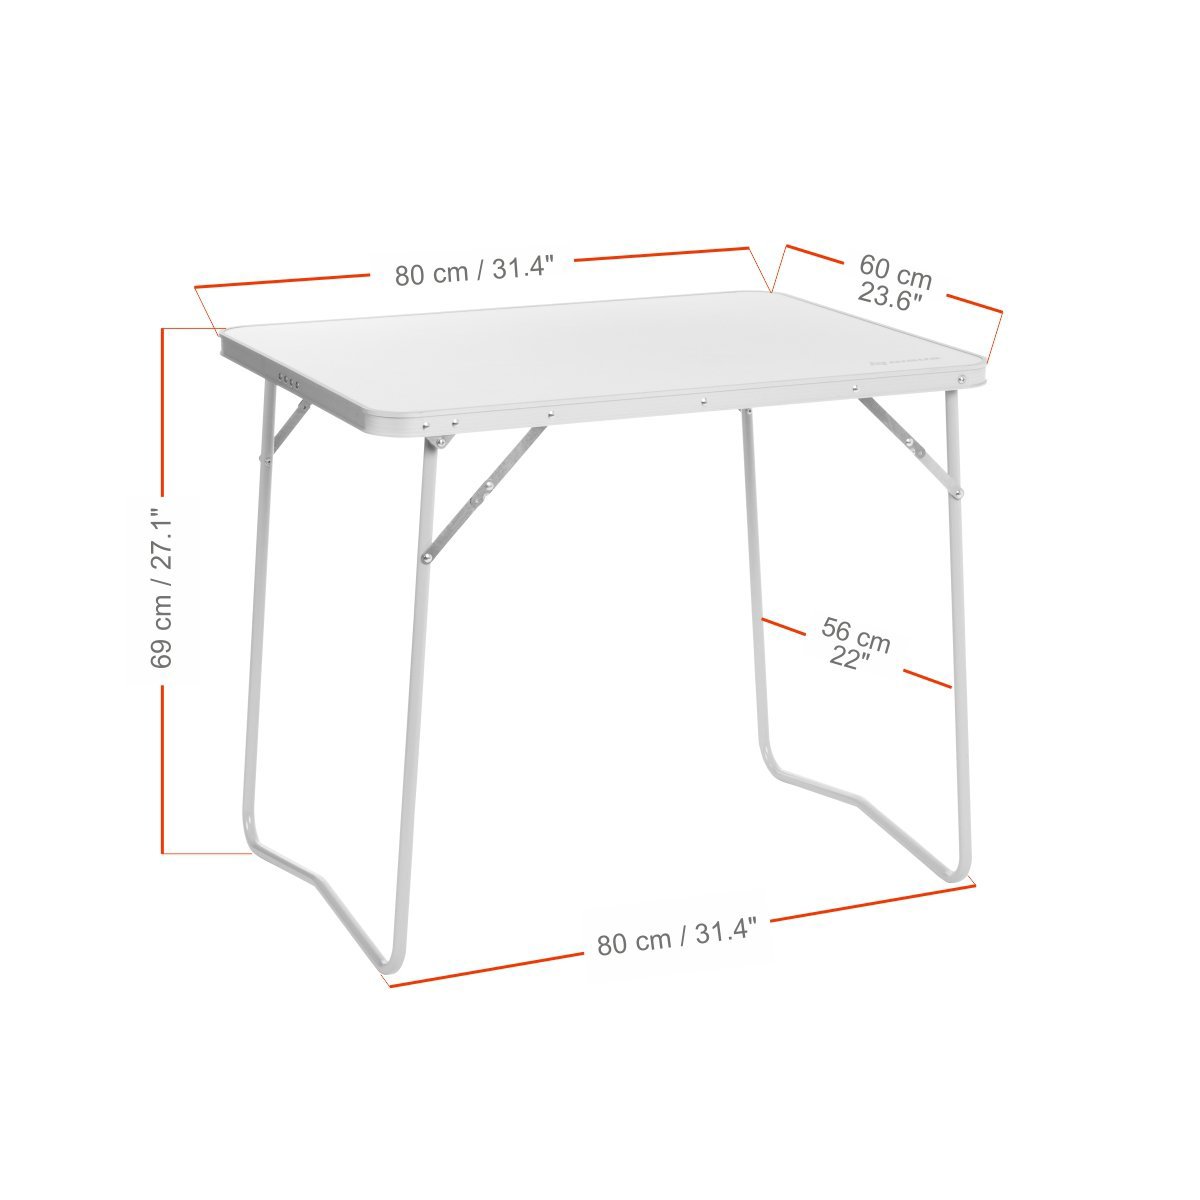 Lightweight compact outdoor table, capable to carry up to 66 lbs, weighing only 9 lbs is very easy to set up, suits for any type of camping activity. is 31.4 inches long, 22 inches wide and 27.1 inches high, with a 31.4*23.6 inches table top